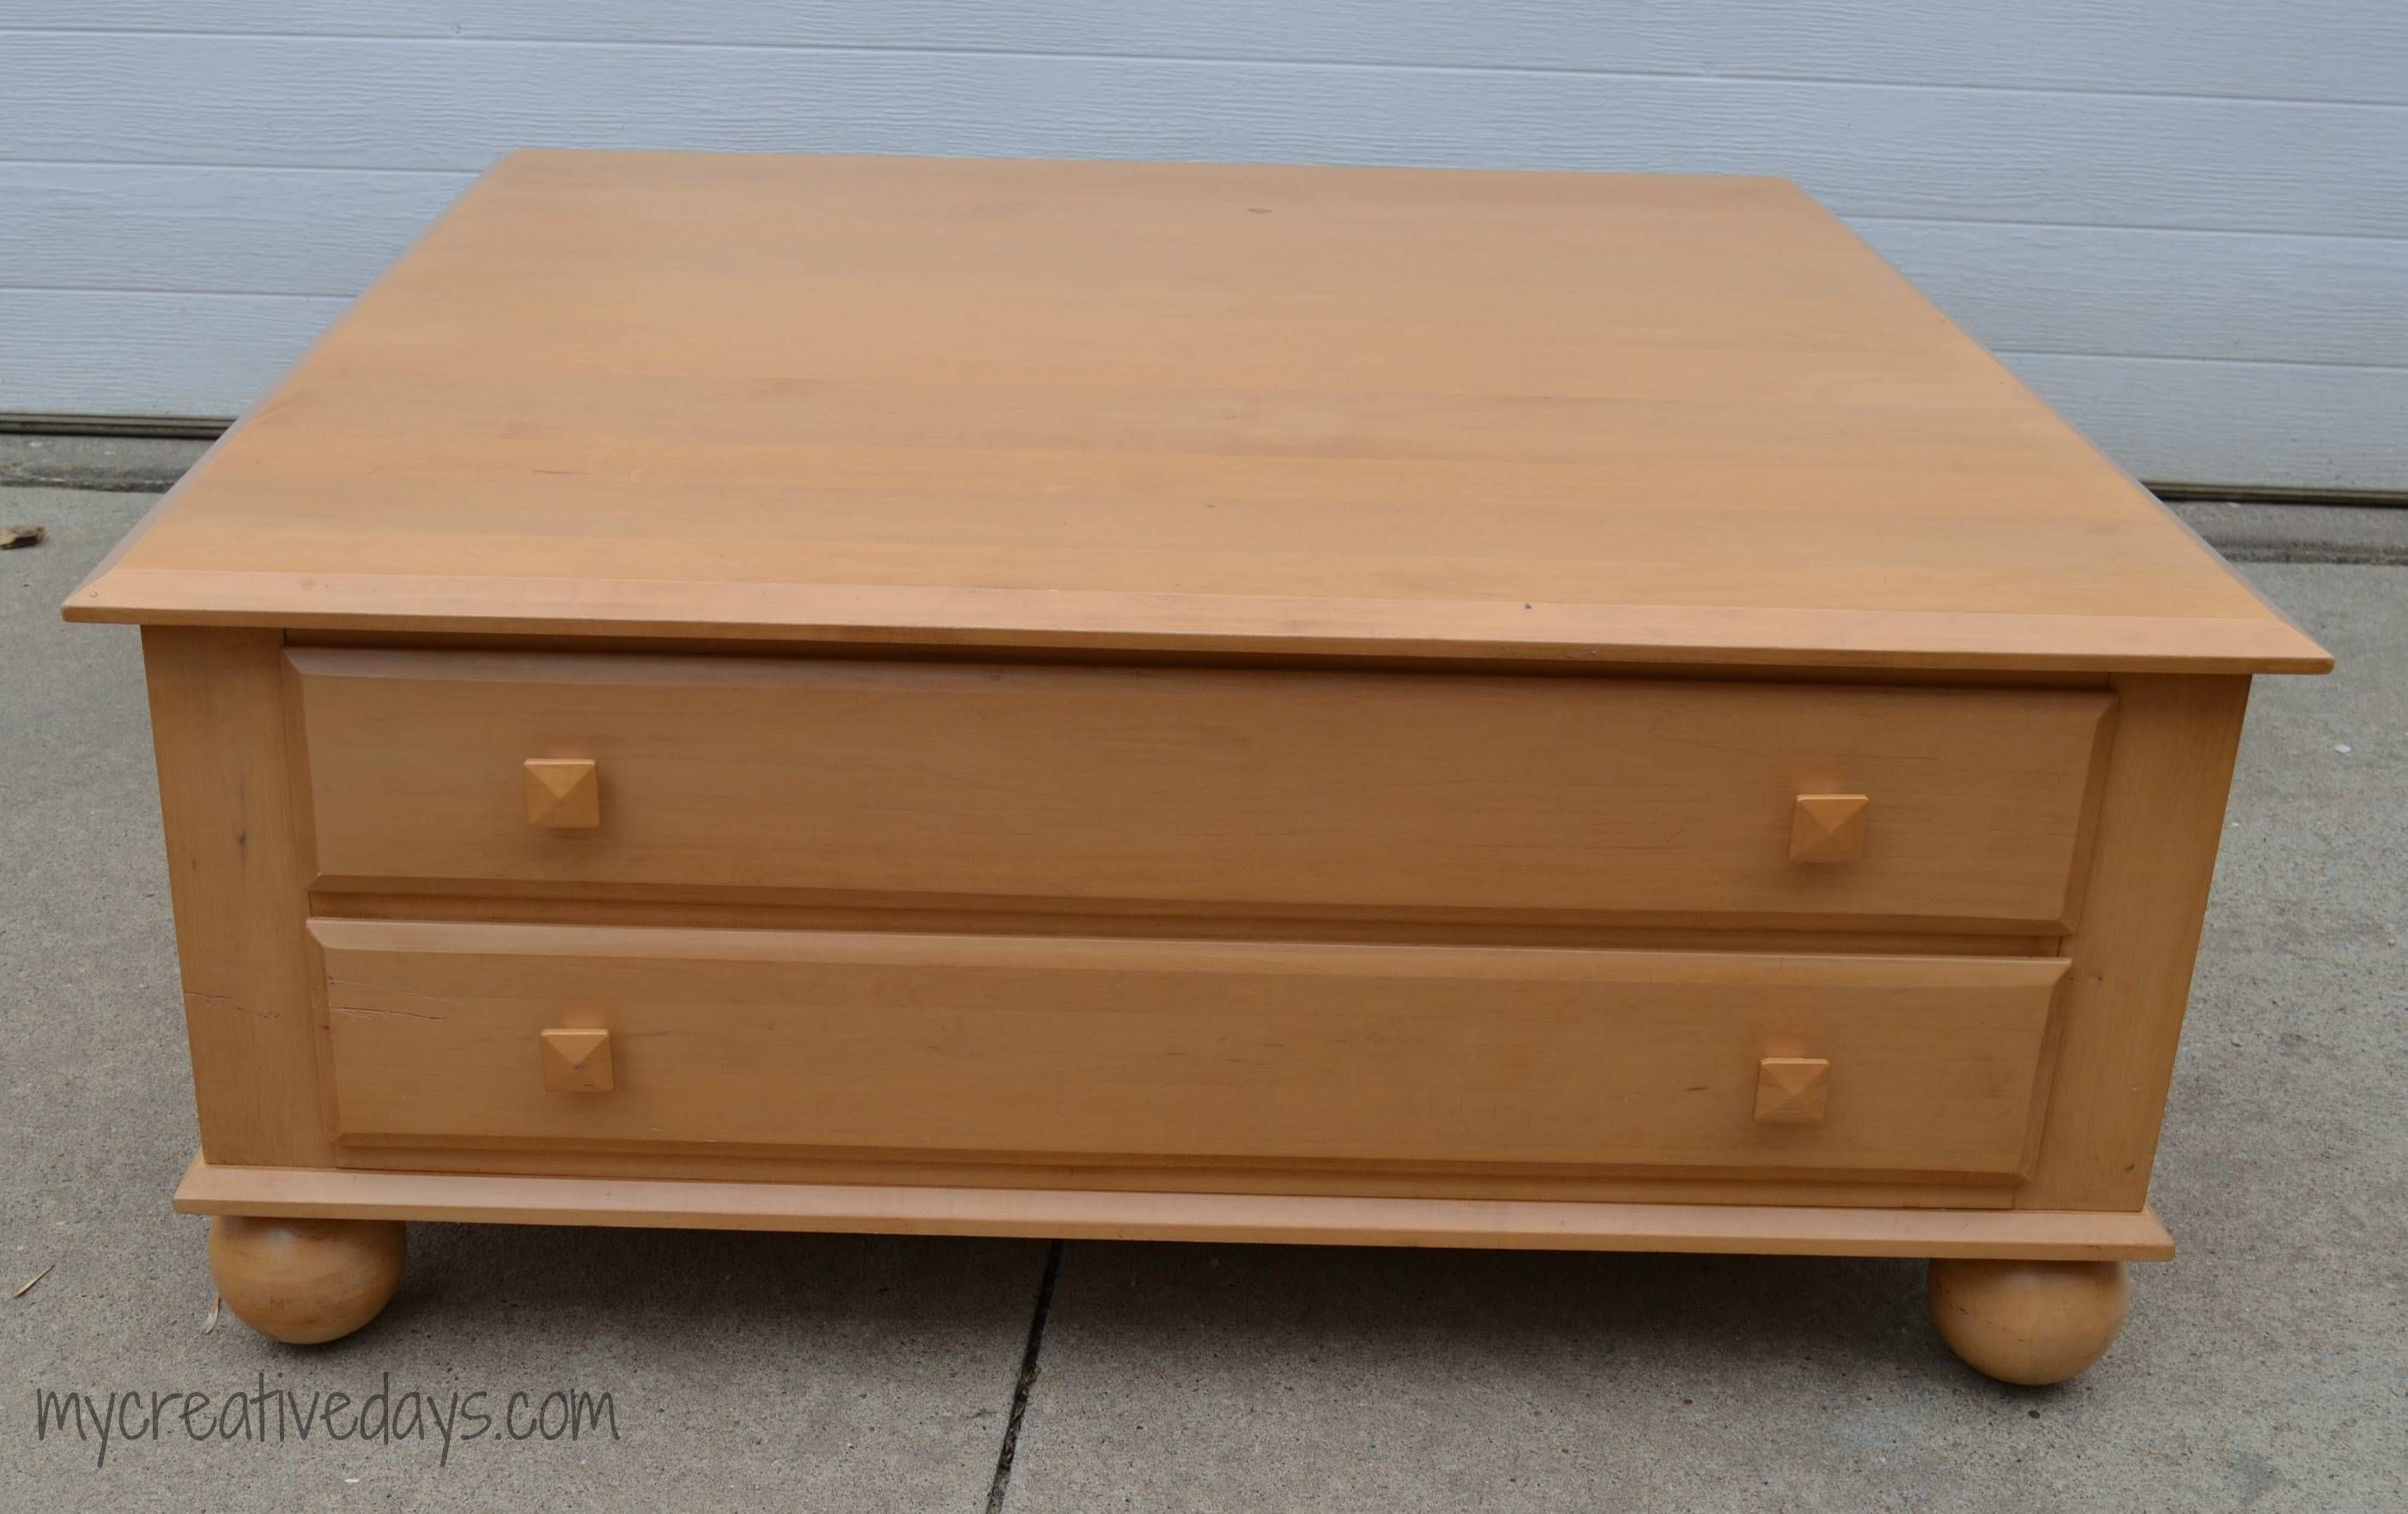 Ethan Allen Square Coffee Table With Drawers | Coffee Tables For Square Coffee Tables With Drawers (View 6 of 30)